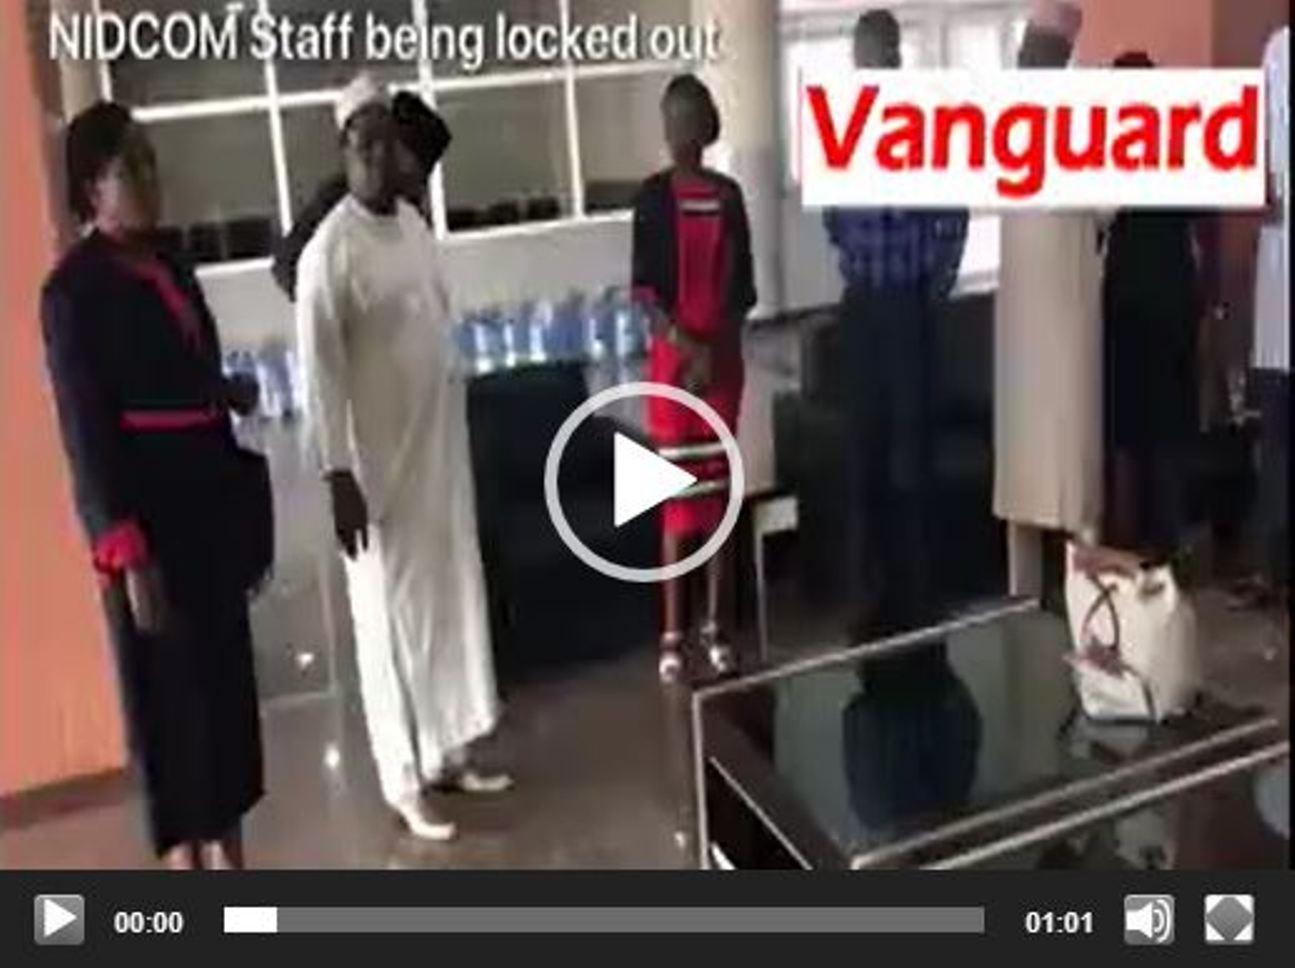 VIDEO: NIDCOM staff after being locked out of NCC office